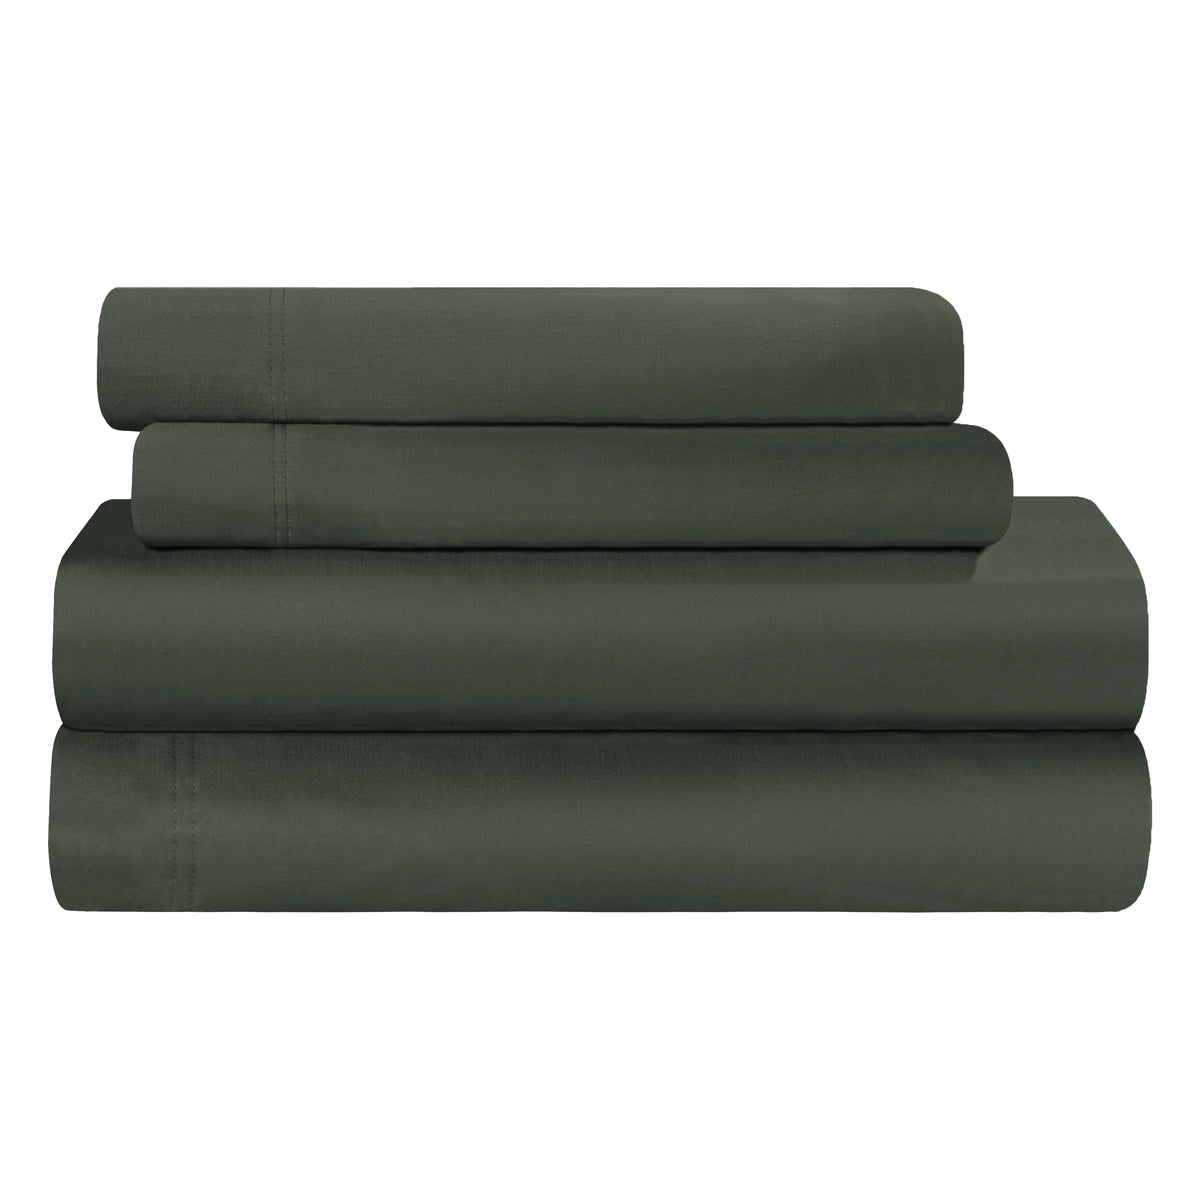 300 Thread Count Rayon From Bamboo Solid Deep Pocket Sheet Set - Gray